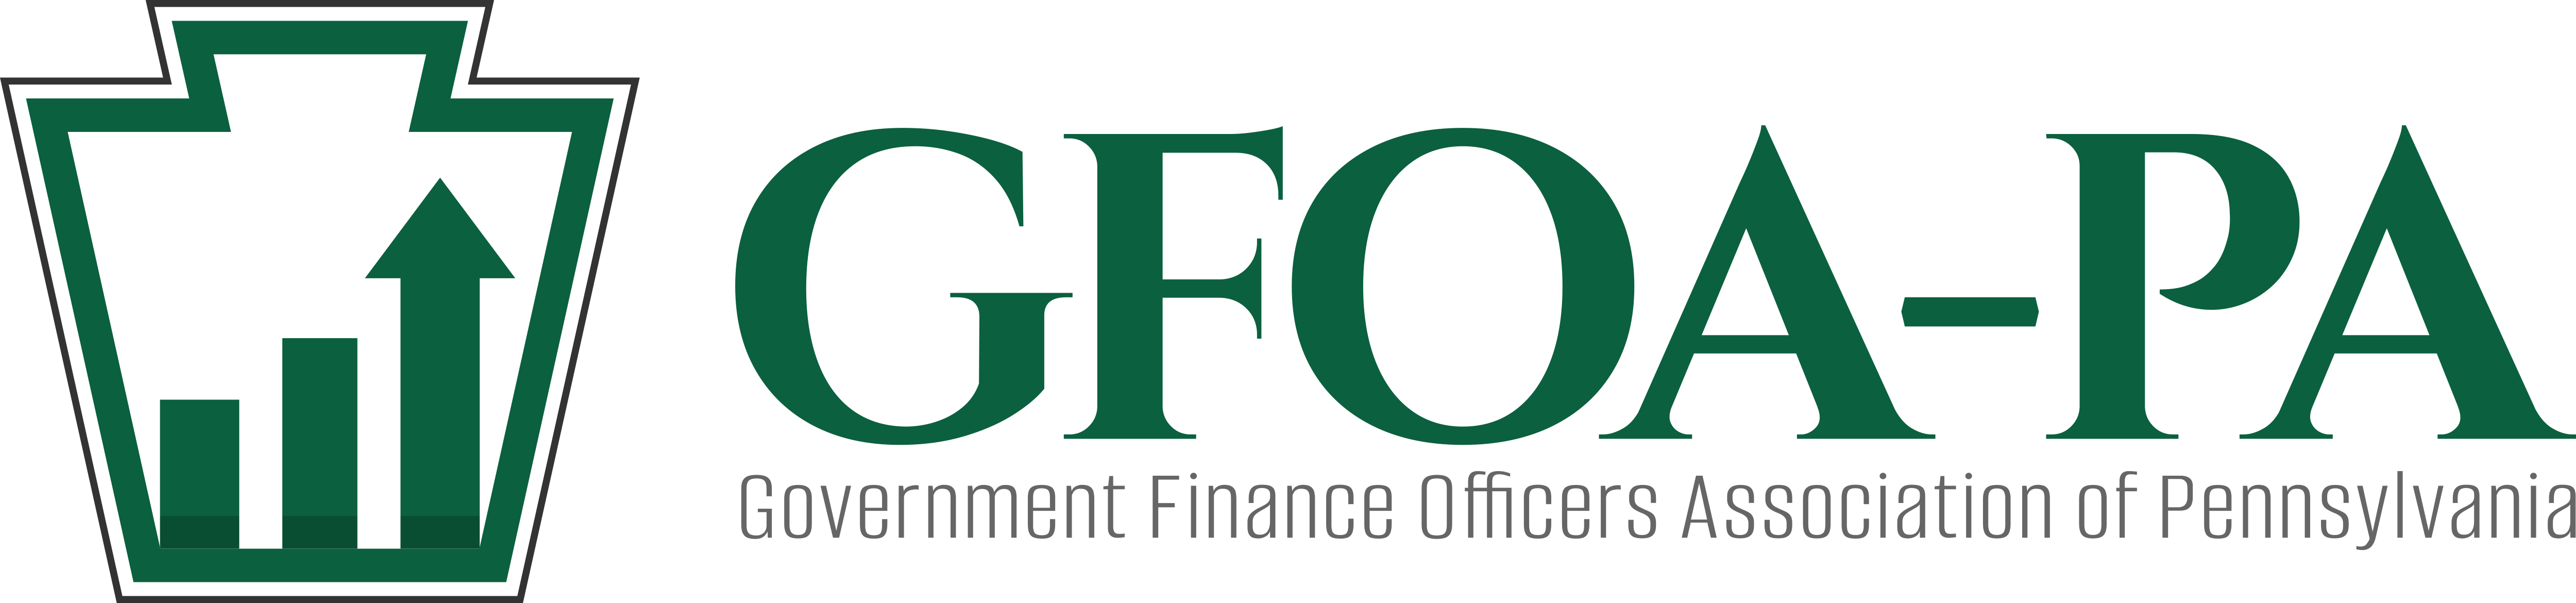 The Government Finance Officers Association of Pennsylvania